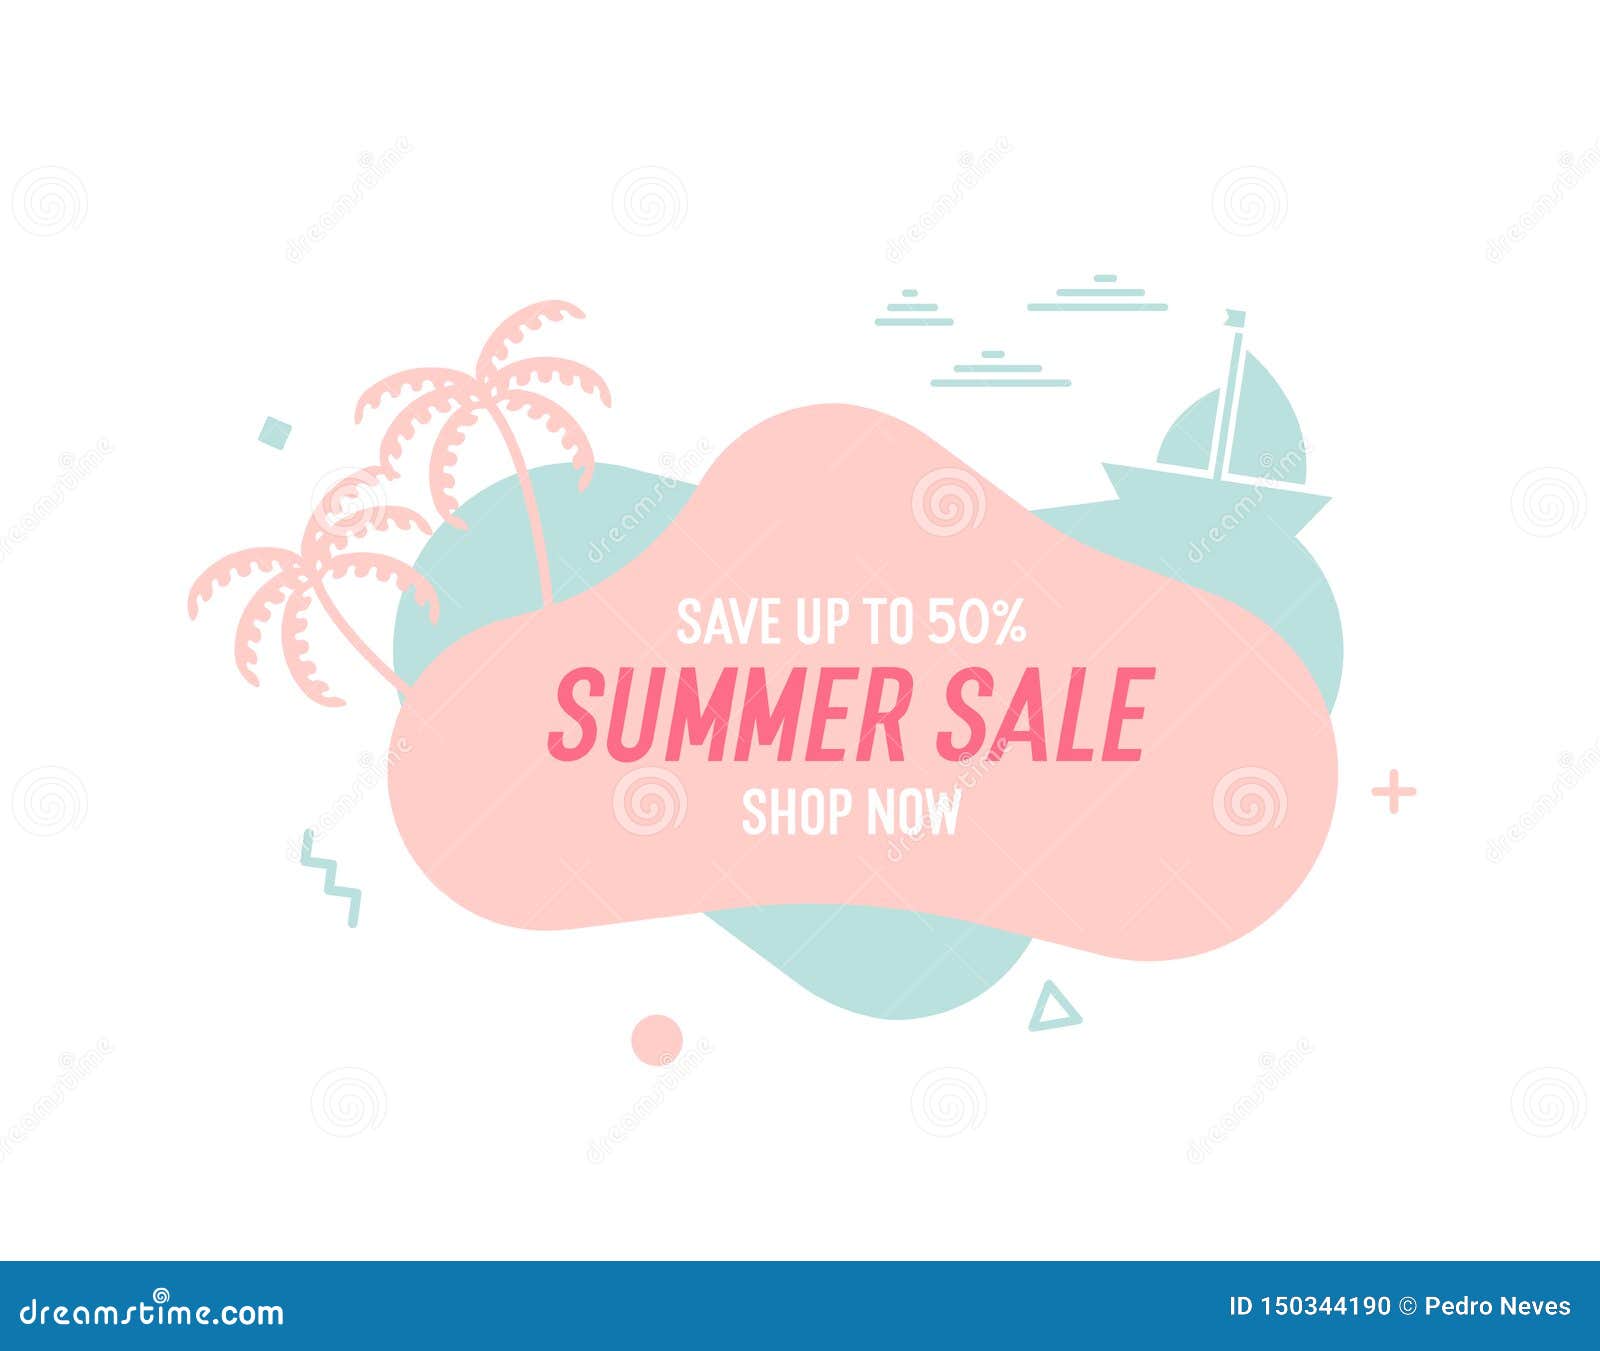 trendy colorful summer sale banner with palmtrees, boat and waves..  geometric template liquid and wavy s with smooth